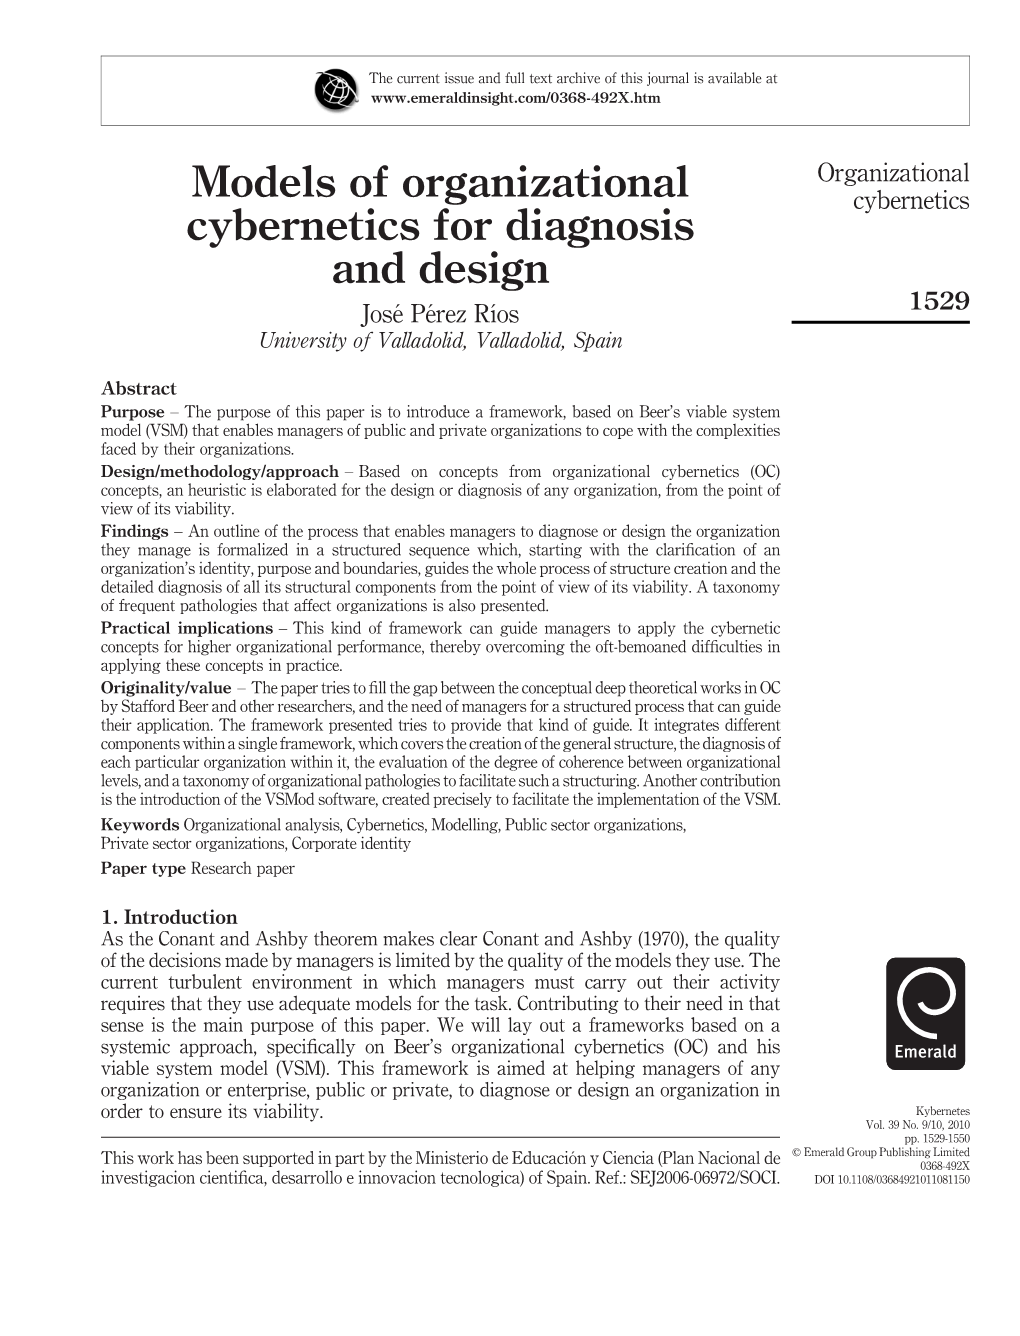 Models of Organizational Cybernetics for Diagnosis and Design